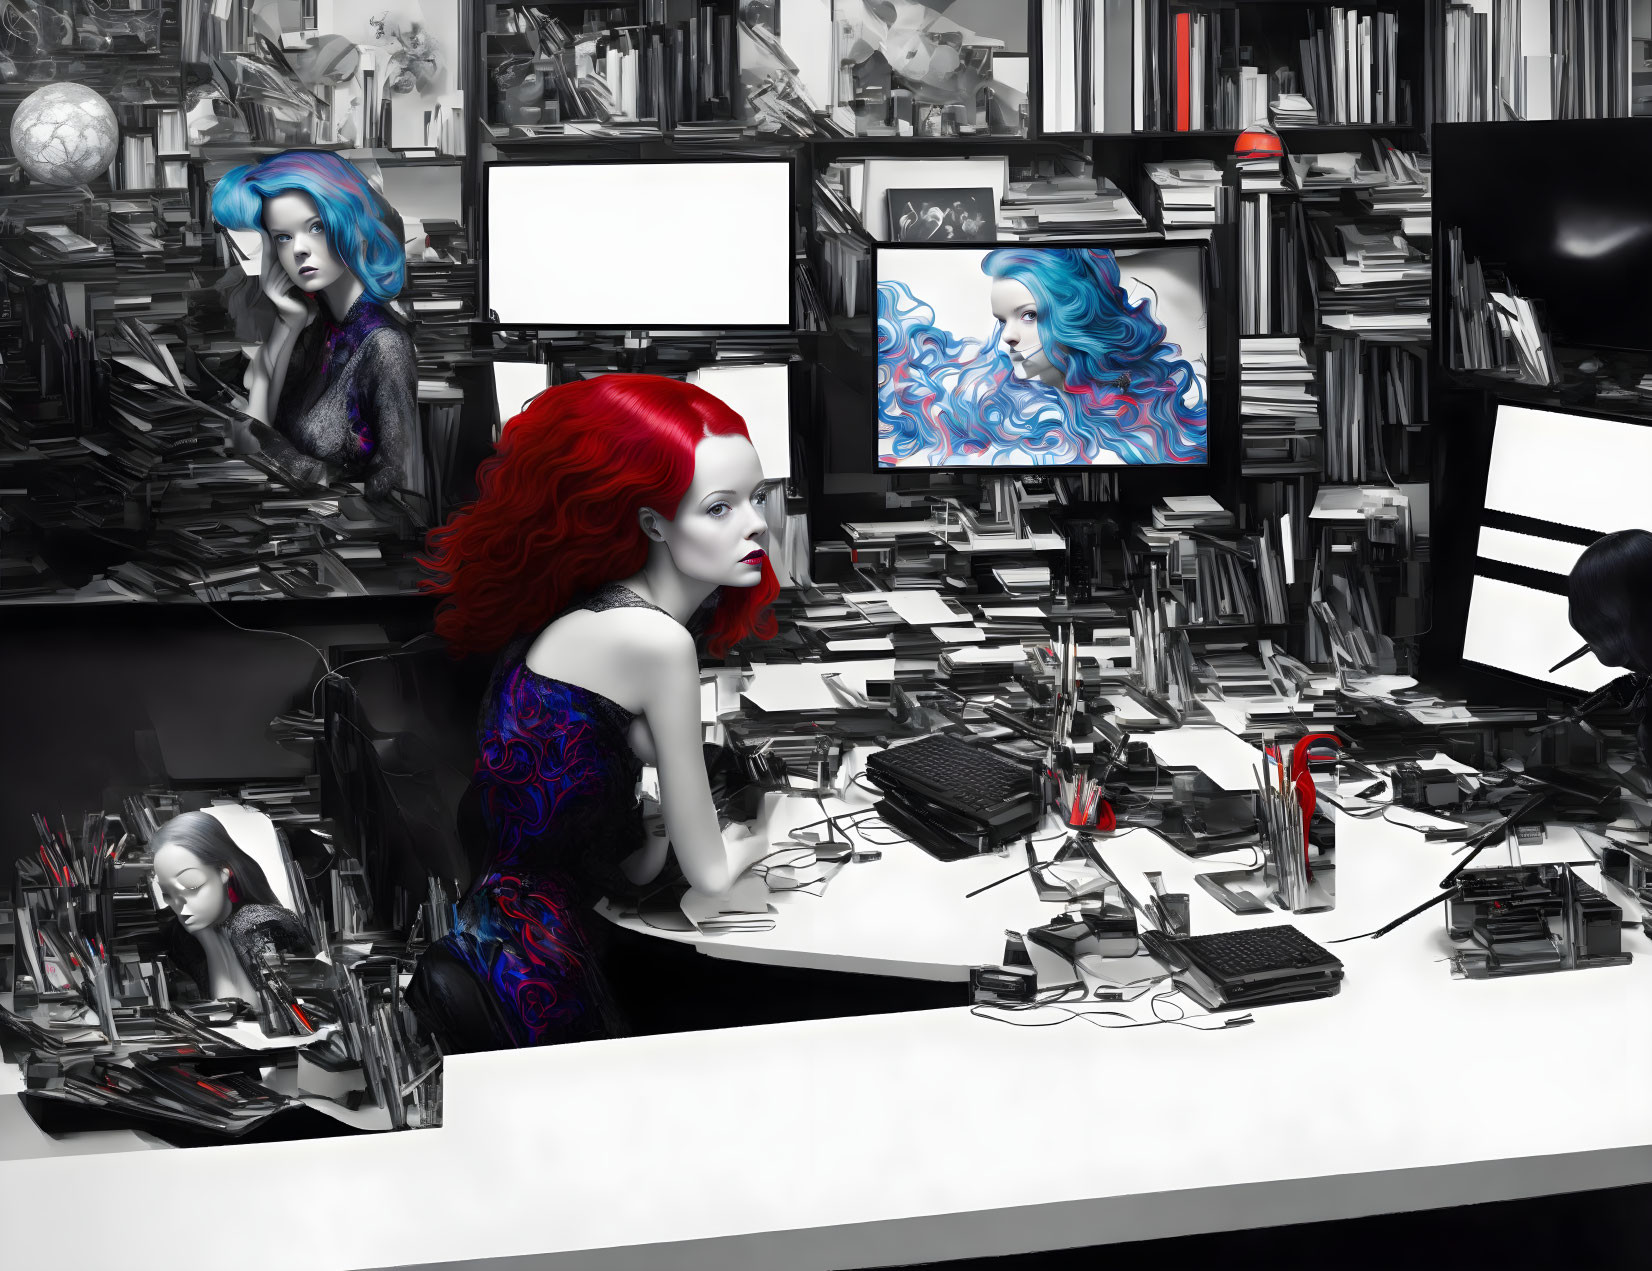 Red-haired woman at cluttered desk with surreal art screens